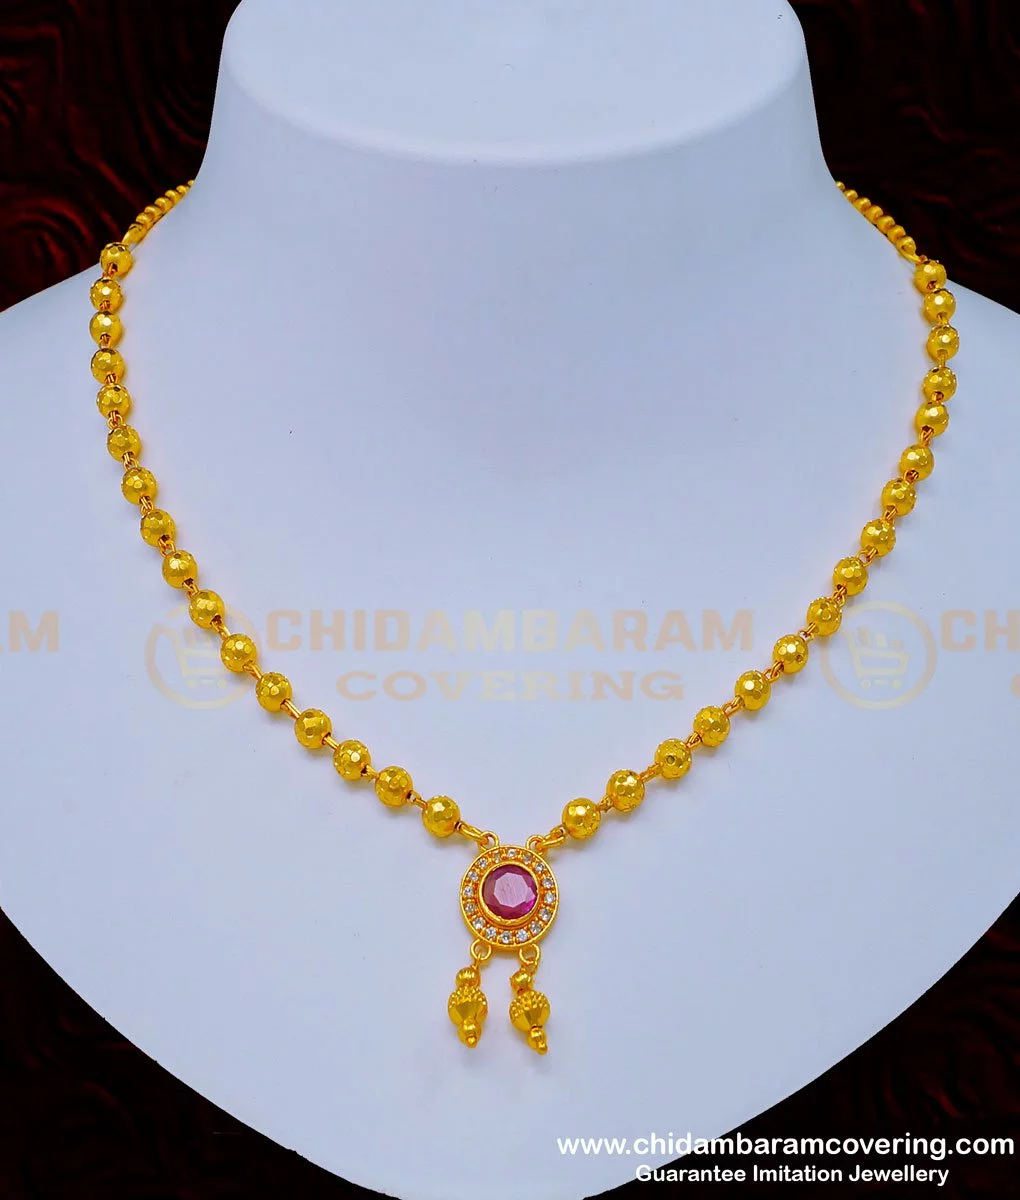 new arrival one gram gold necklace design collections with price - YouTube  | Simple necklace designs, Gold necklace designs, Gold bride jewelry